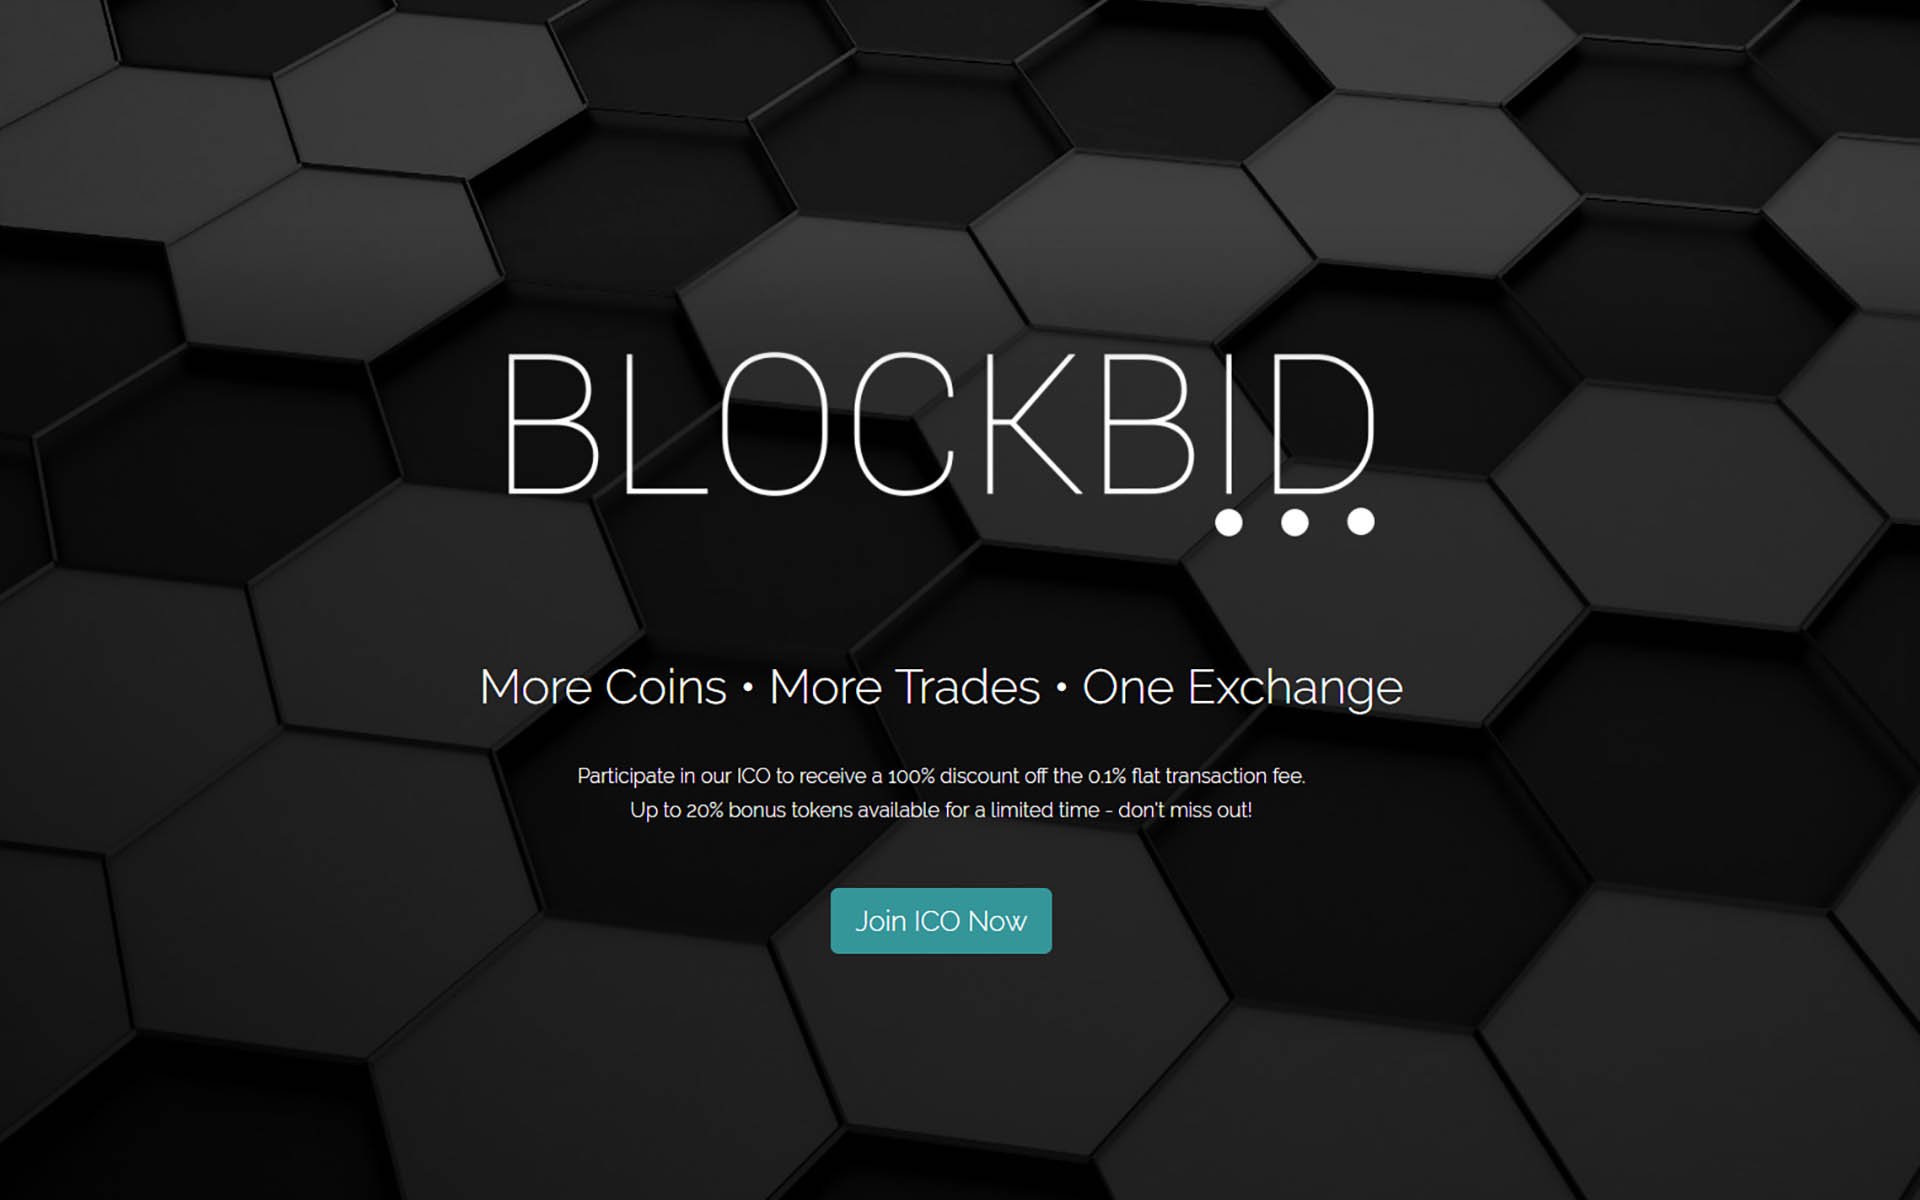 Blockbid Announces Launch Of ICO Backed By First Of Its Kind Multi-Cryptocurrency Trading Platform